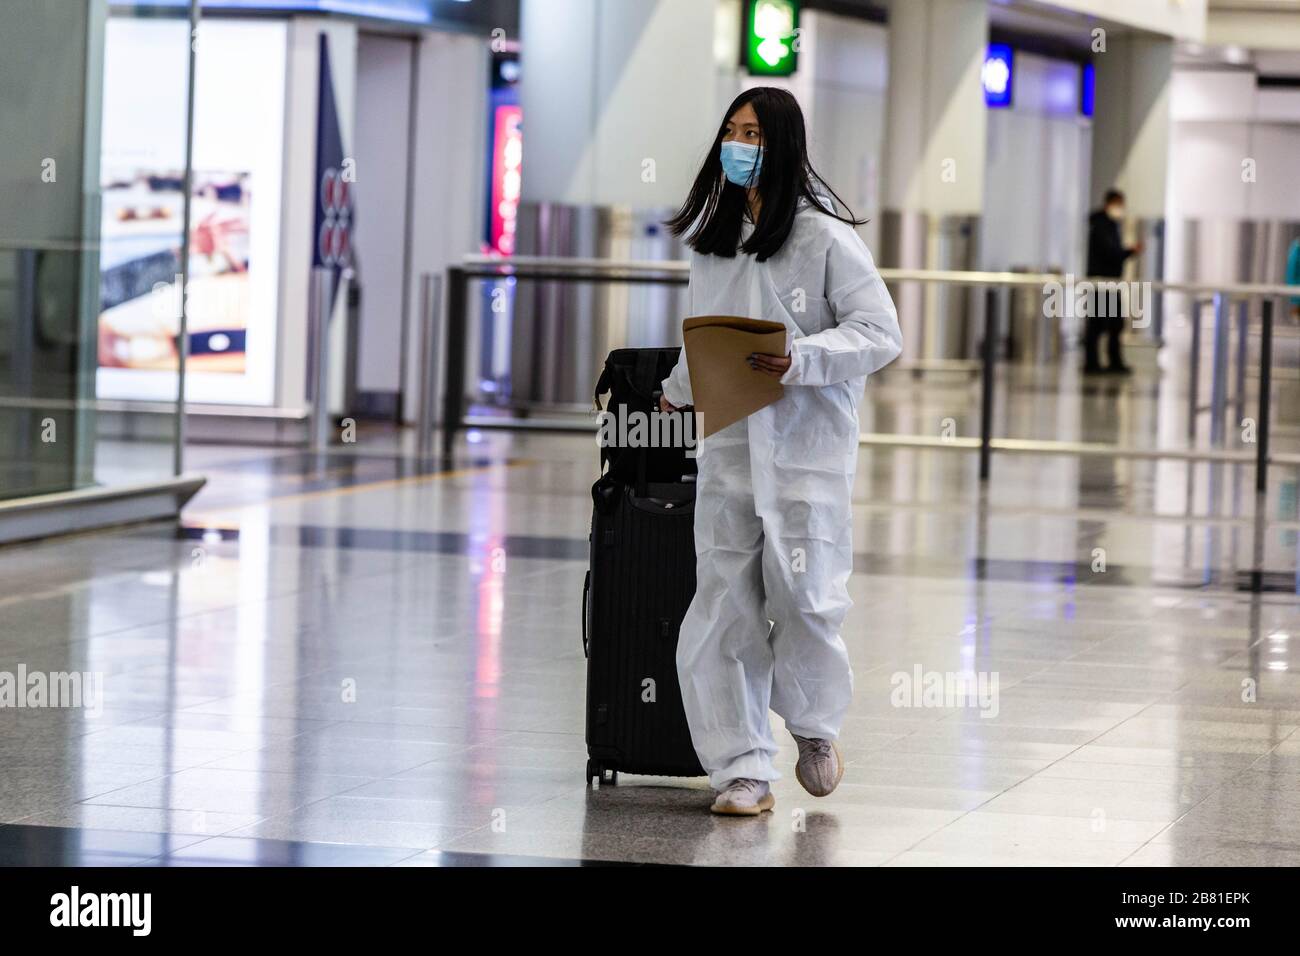 A masked passenger wearing a protective white robe as preventive measure  from catching the Covid-19 coronavirus. With the coronavirus outbreak  worsening around the world, hundreds of passengers and students fly back to